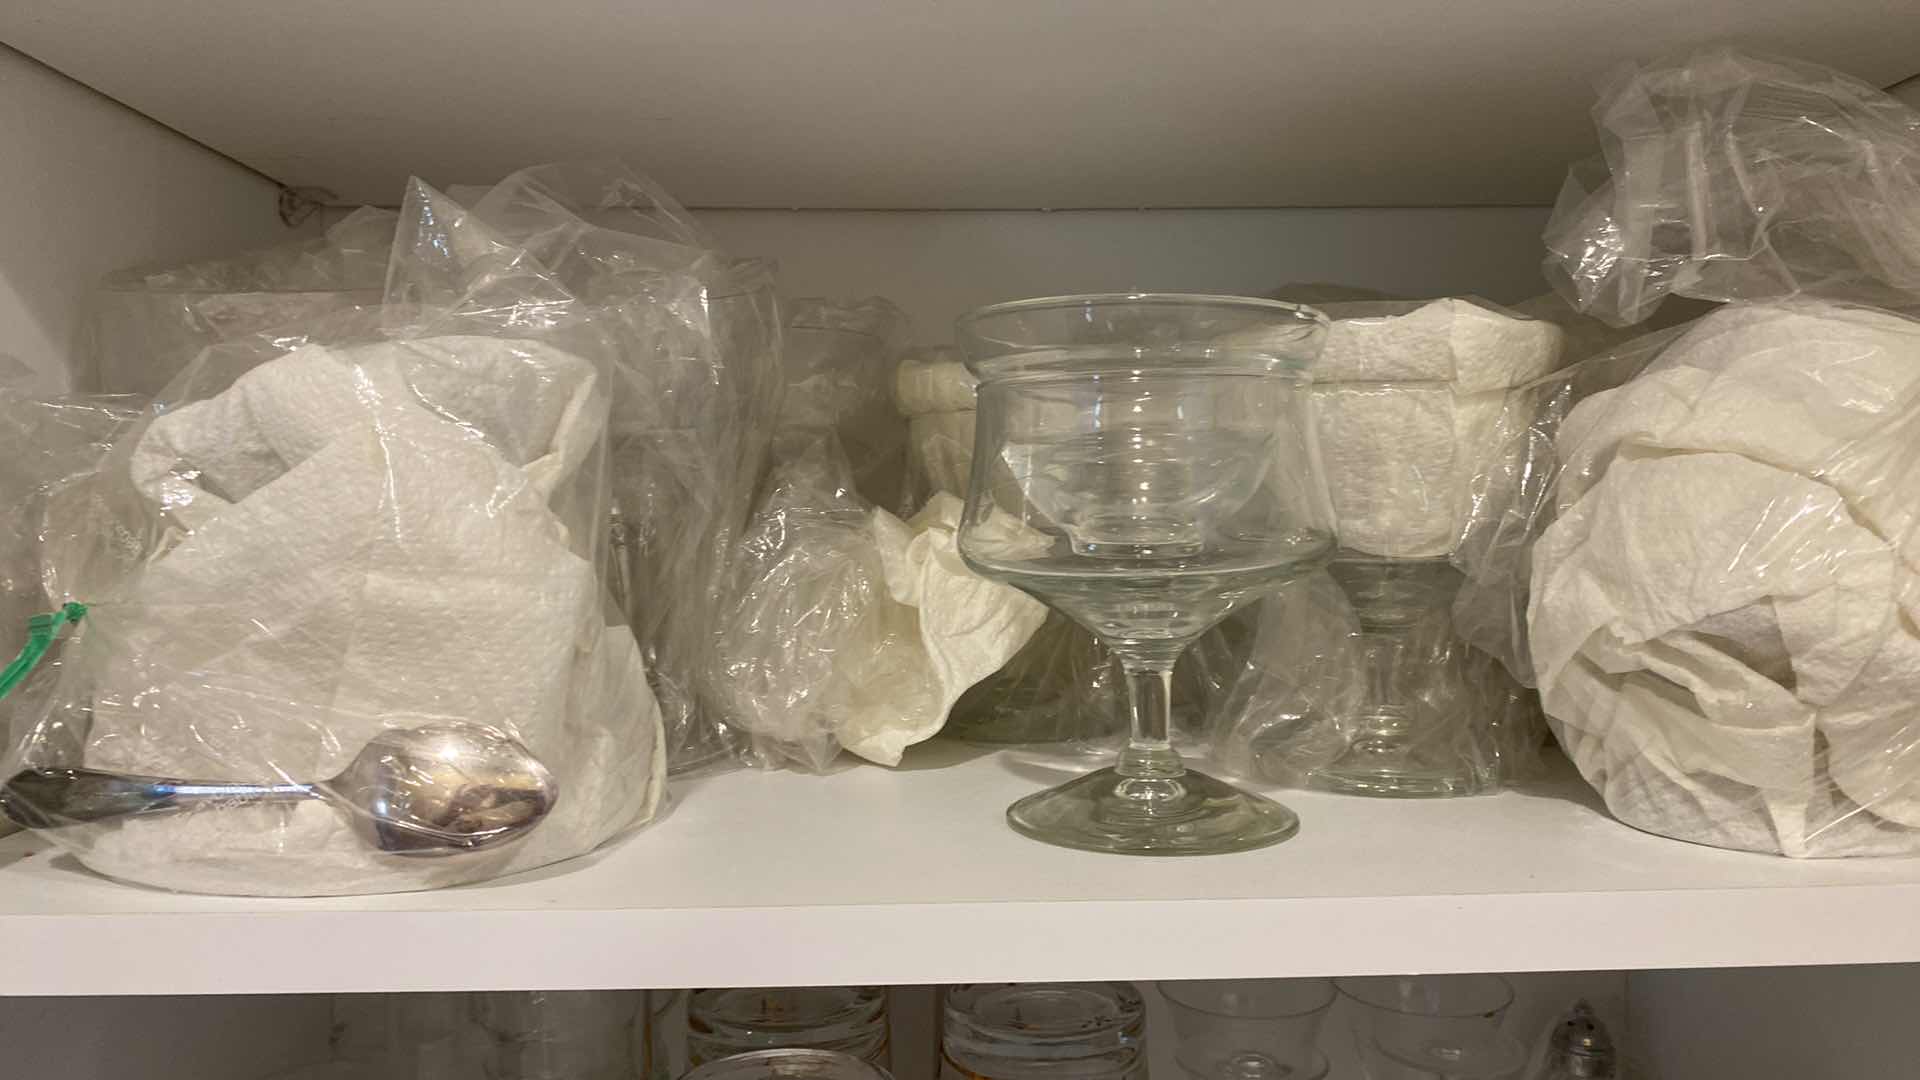 Photo 3 of 3 SHELVES IN BUTLER PANTRY GLASSES AND ICE CREAL BOWLS